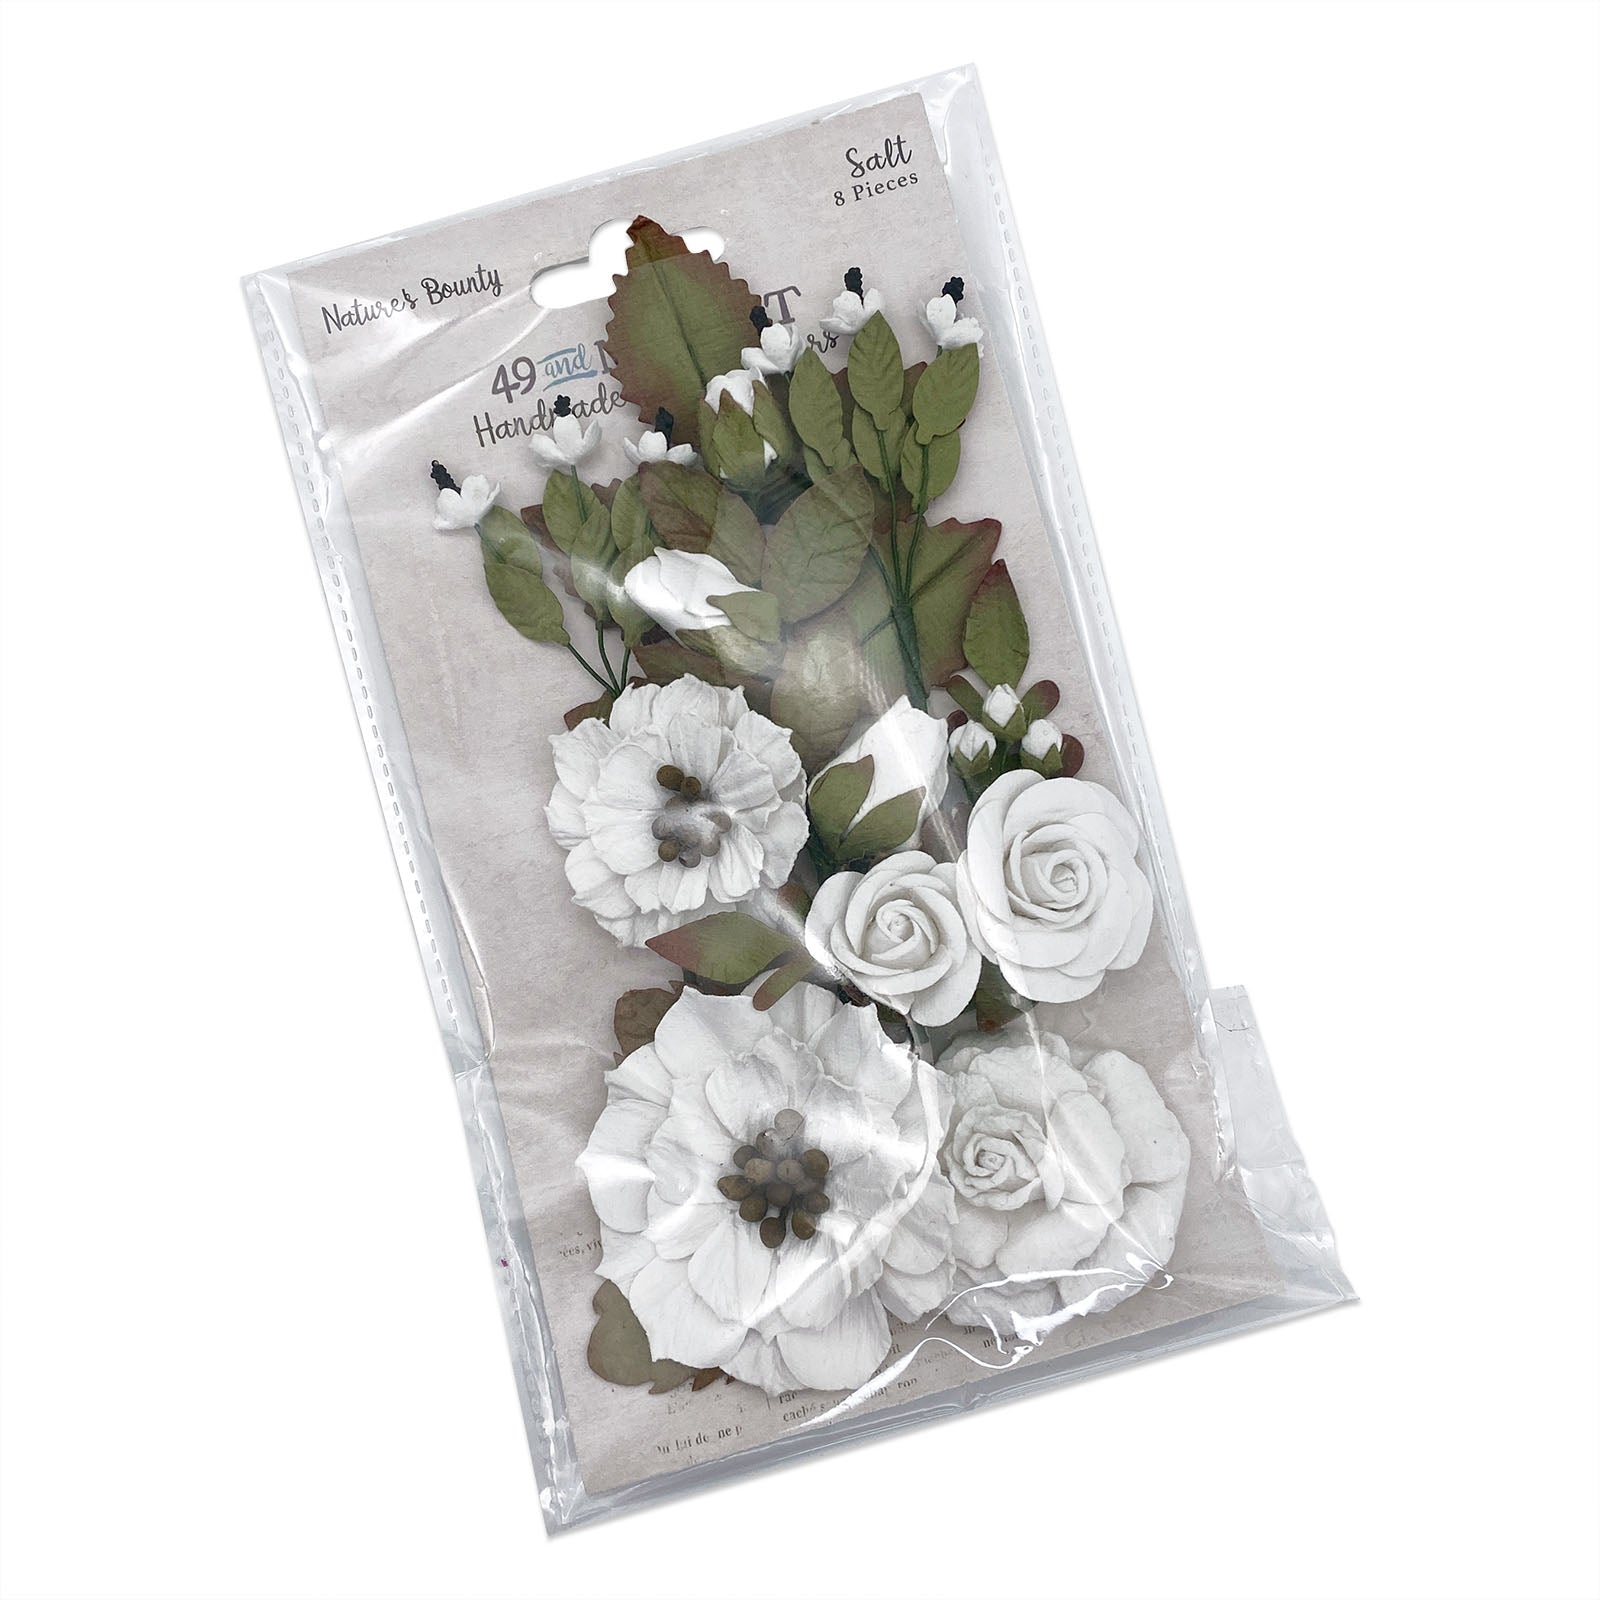 49 and Market Natures Bounty paper flowers - Salt